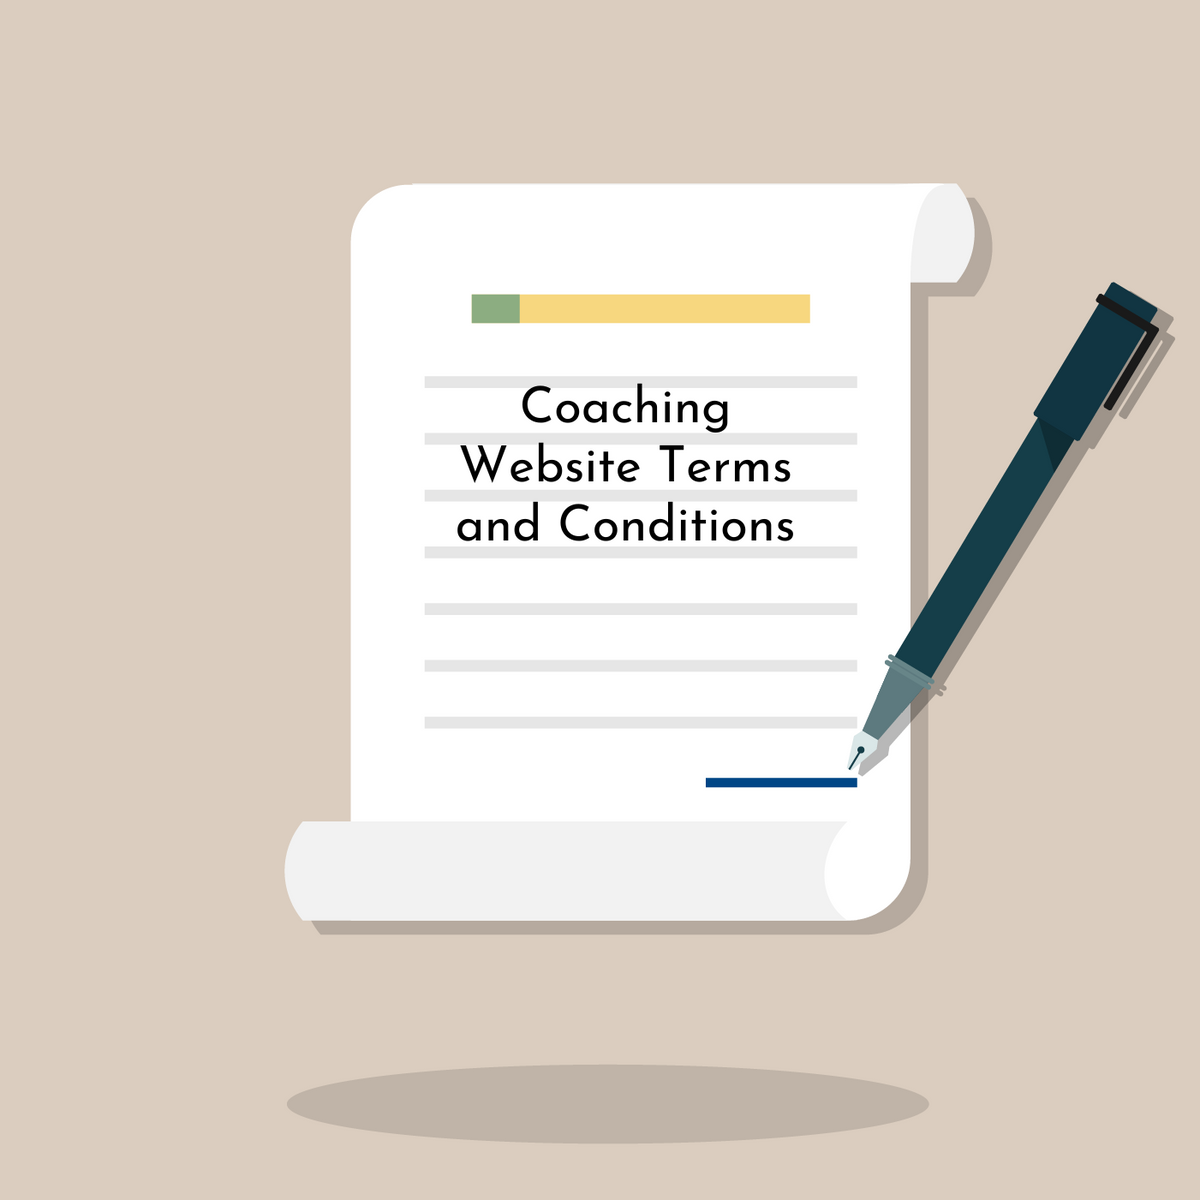 Coaching Website Terms and Conditions